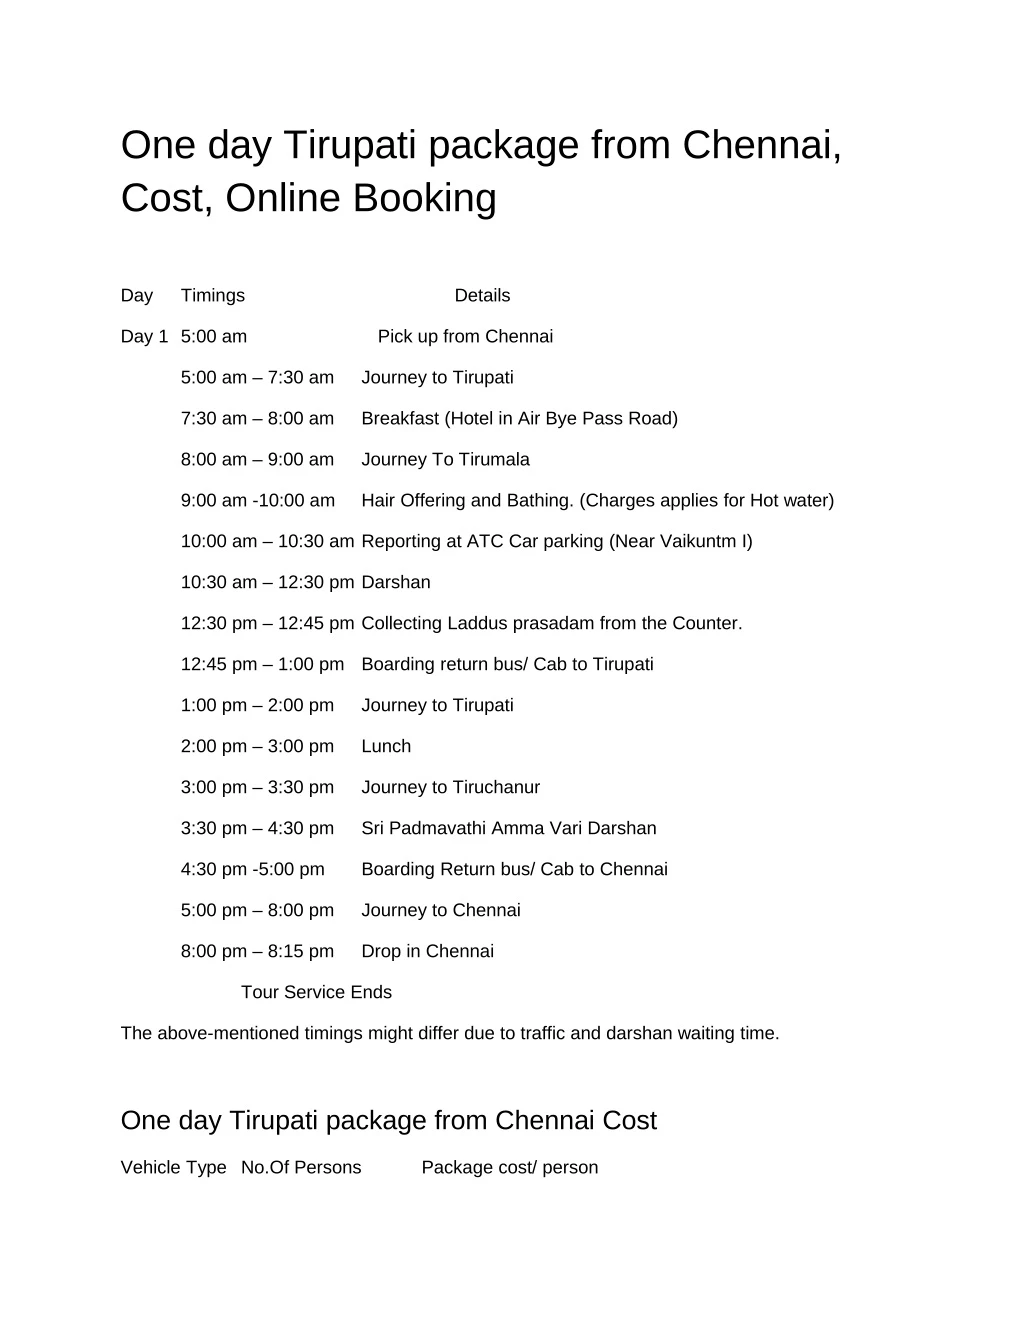 one day tirupati package from chennai cost online